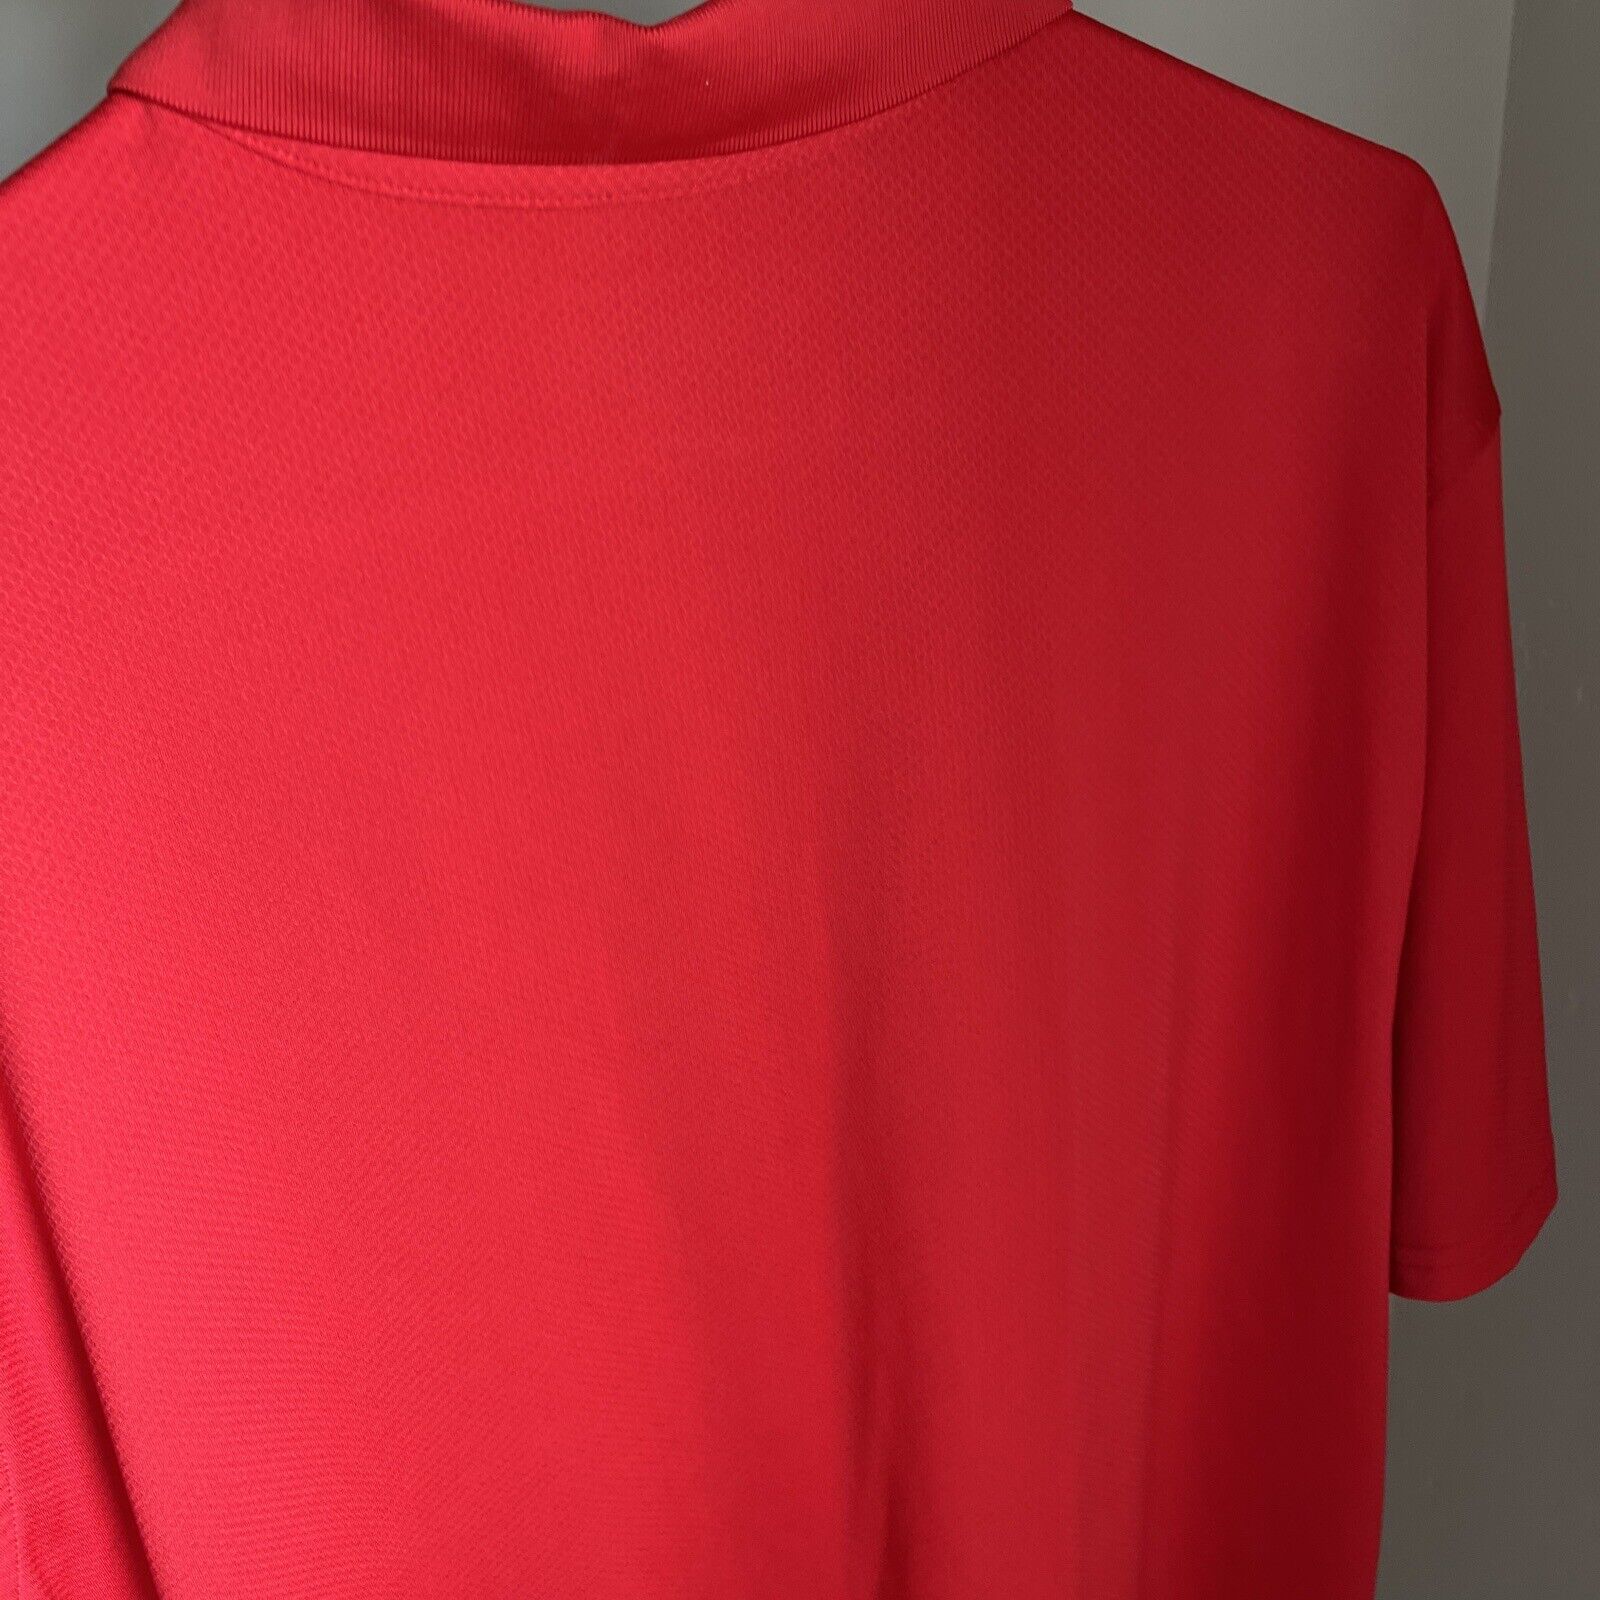 Under Armor Collared Shirt Mens XL Red Performanc… - image 5